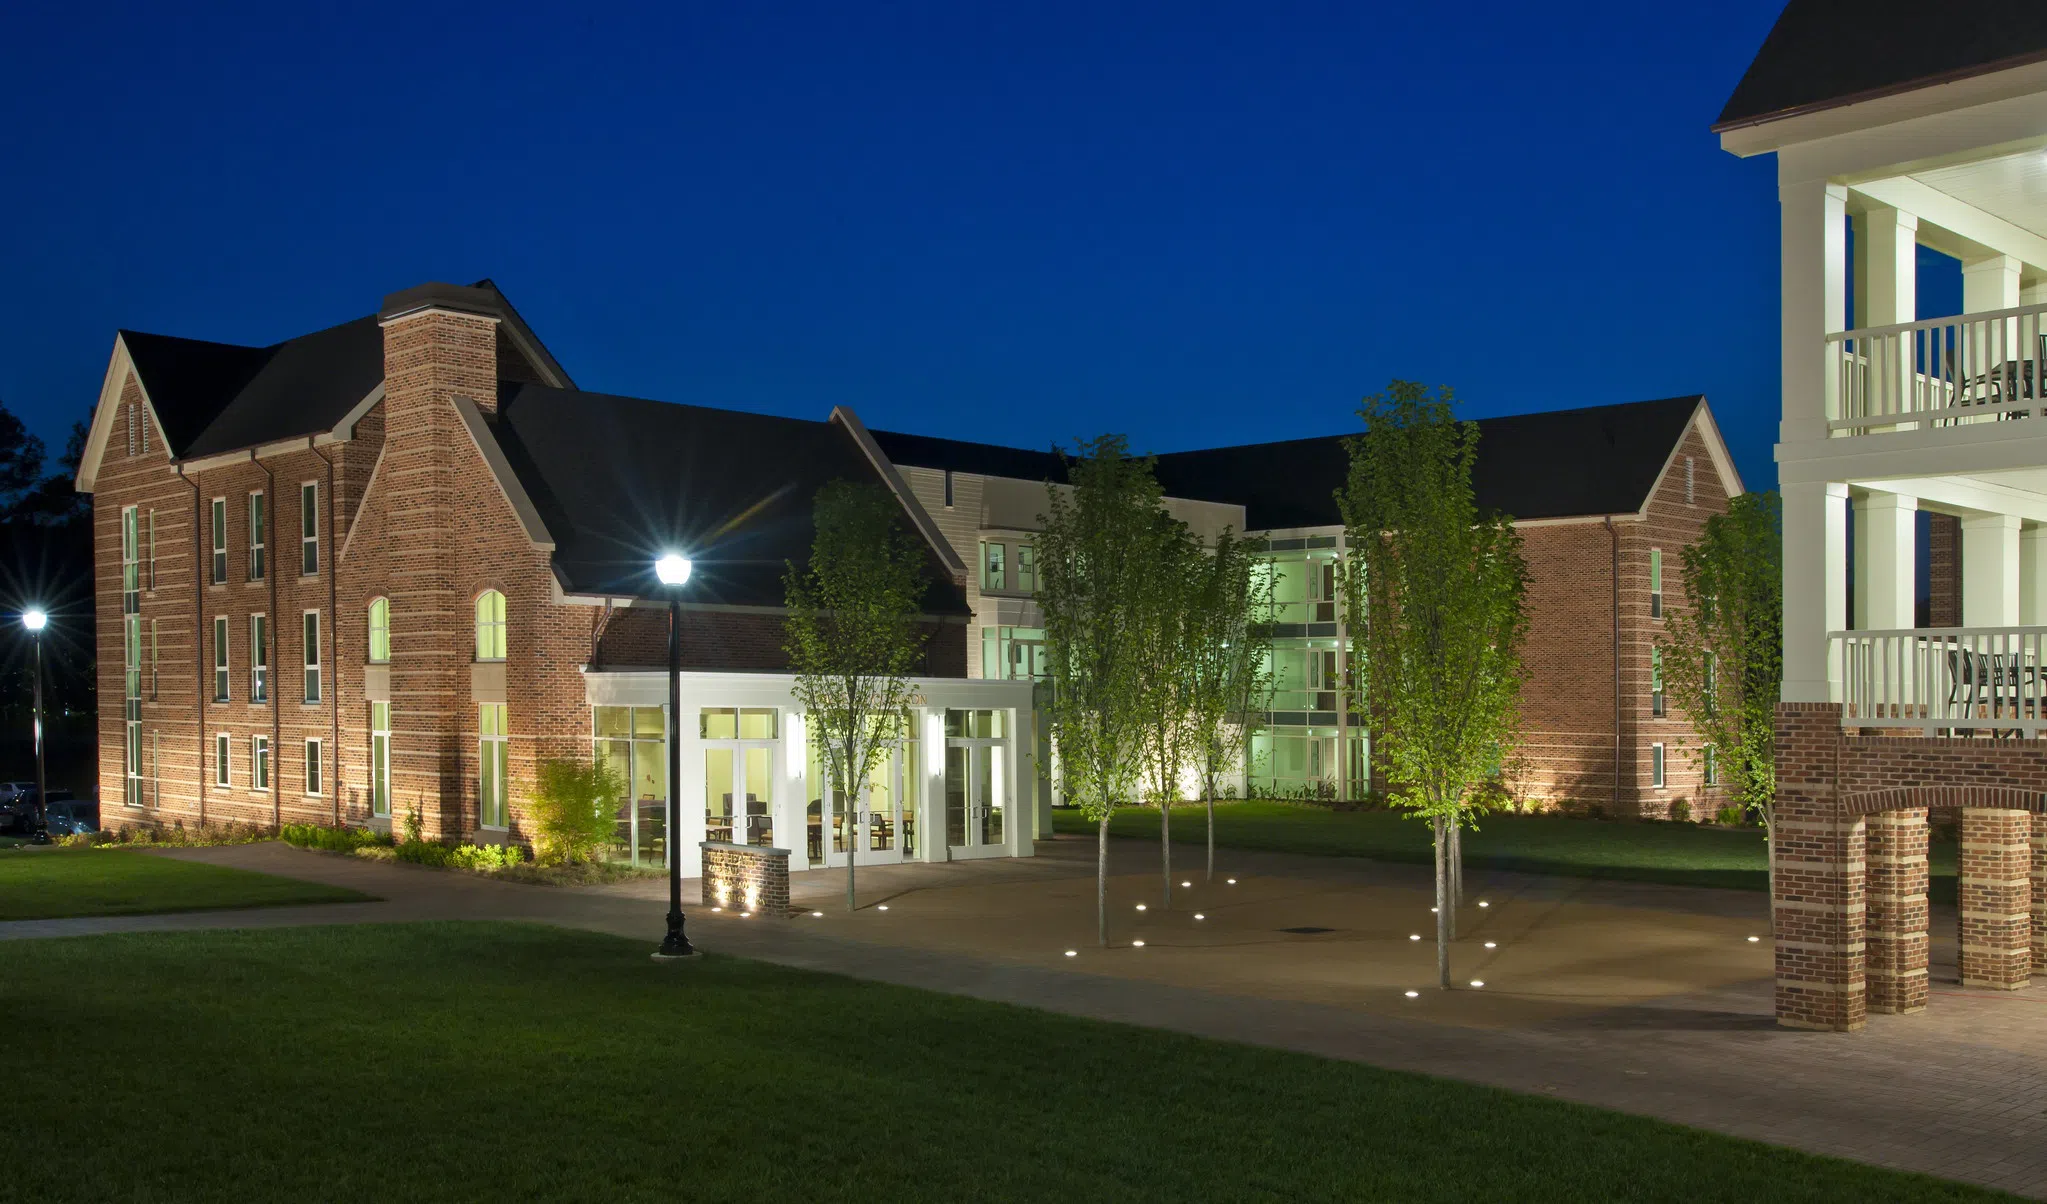 Landscape view of residence hall building at night.